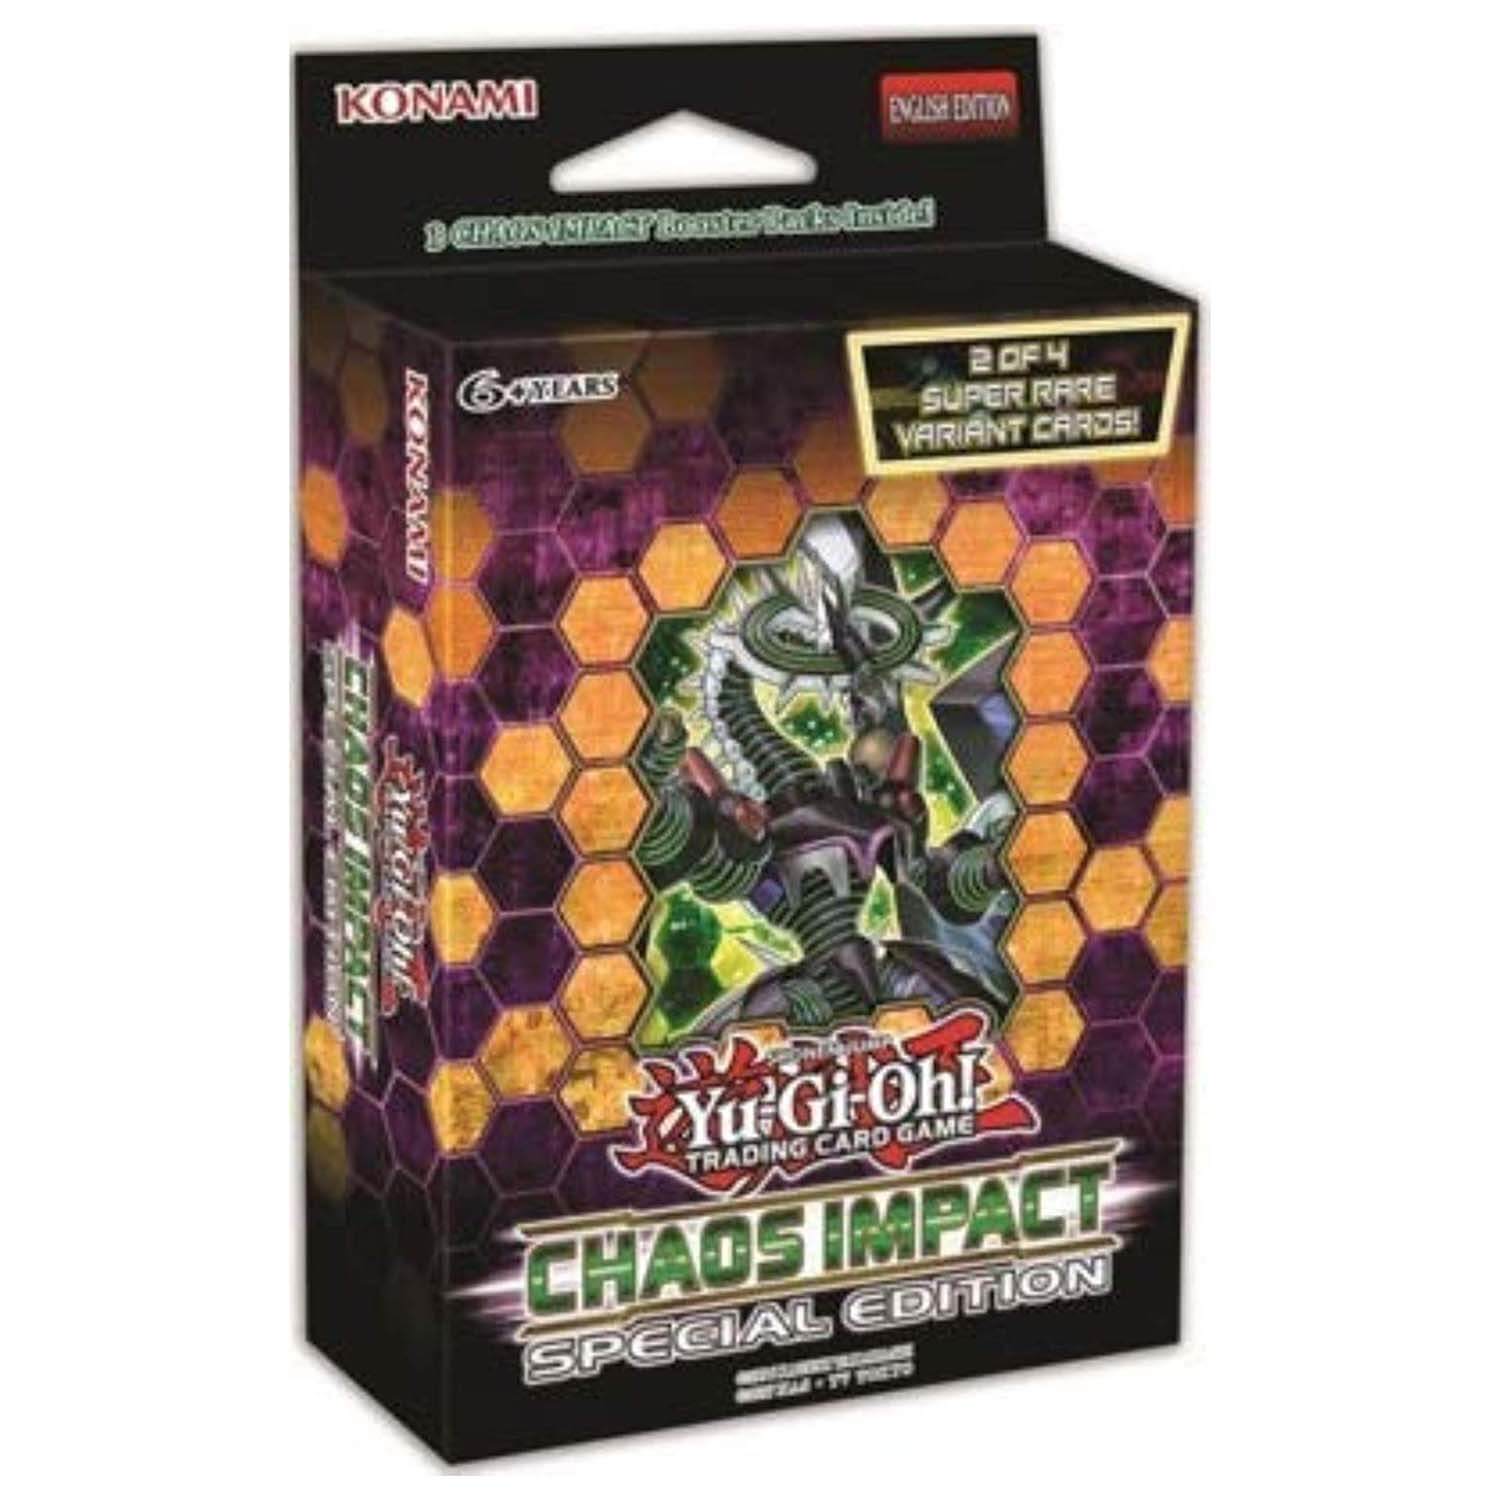 Yu-Gi-Oh! Trading Card Game Chaos Impact Special Edition Theme Deck